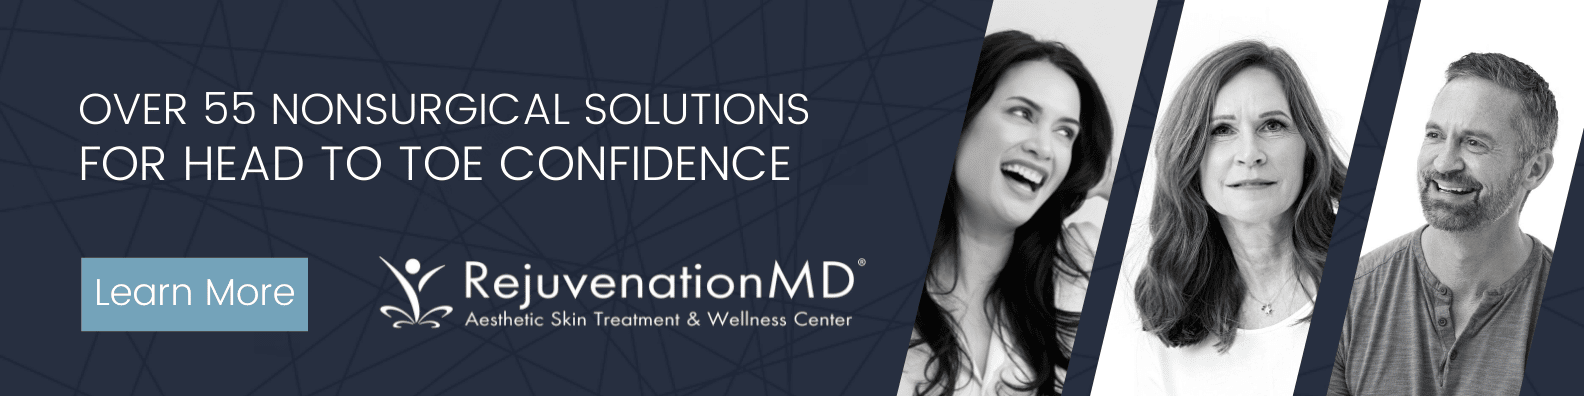 Over 55 different services for head to toe confidence RejuvenationMD